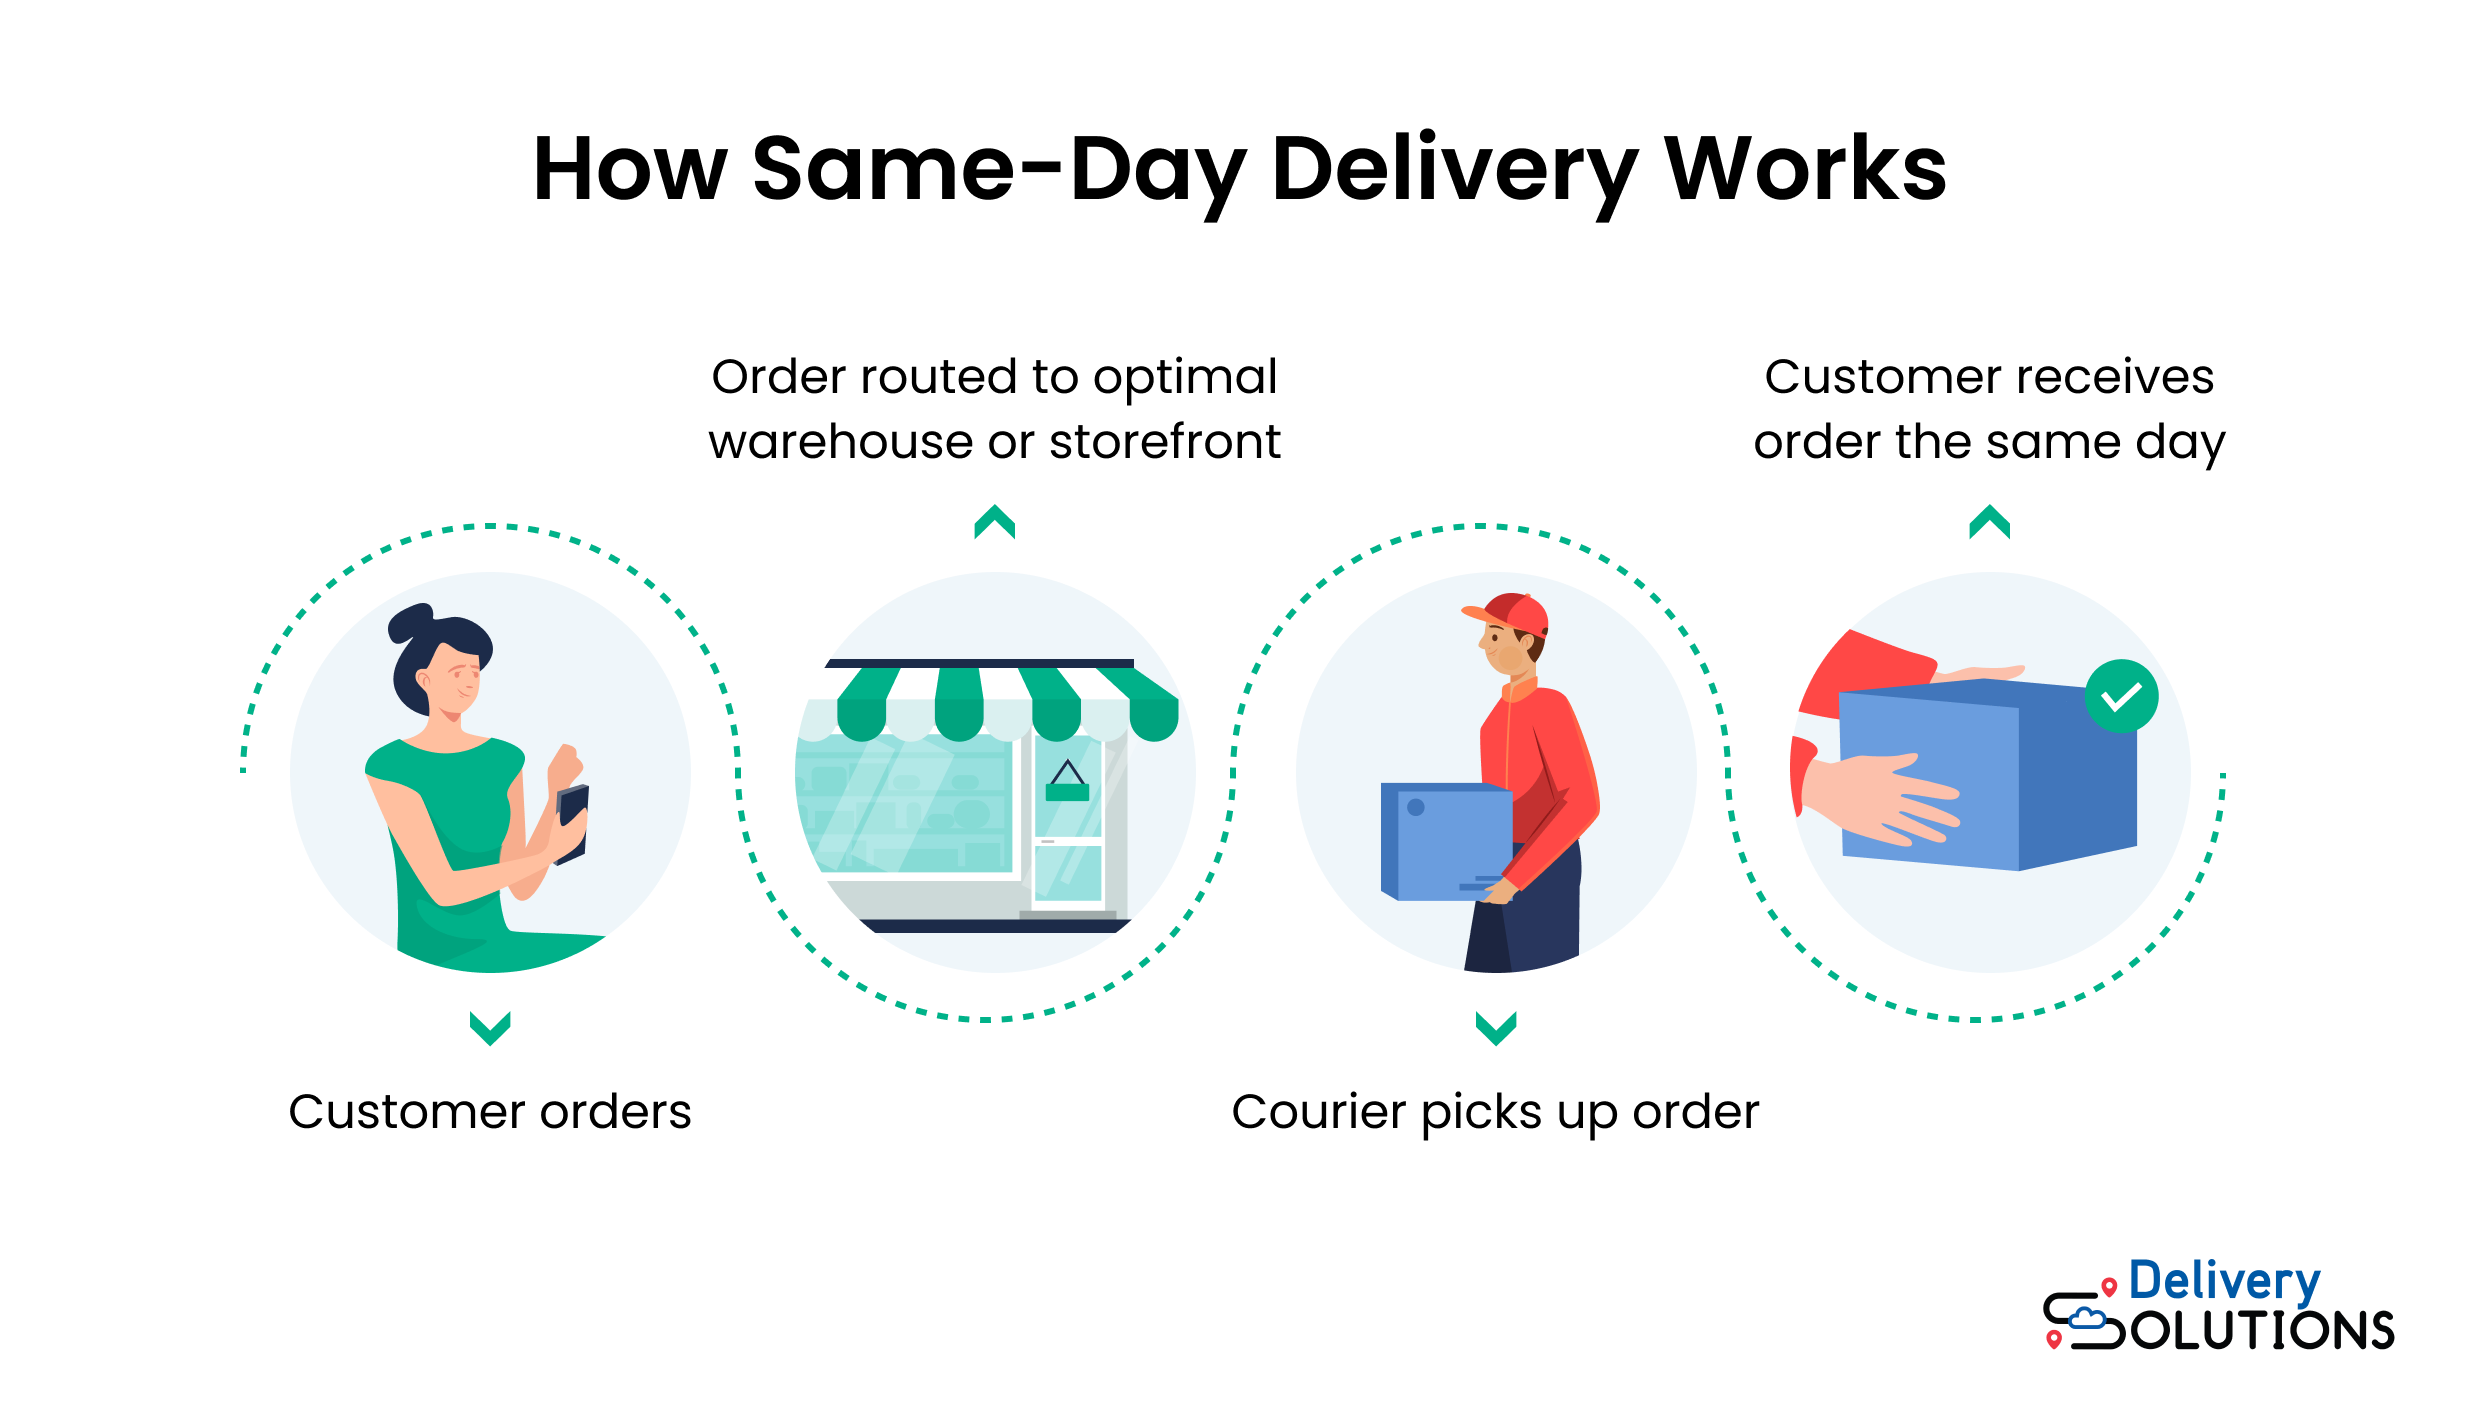 How same-day delivery works